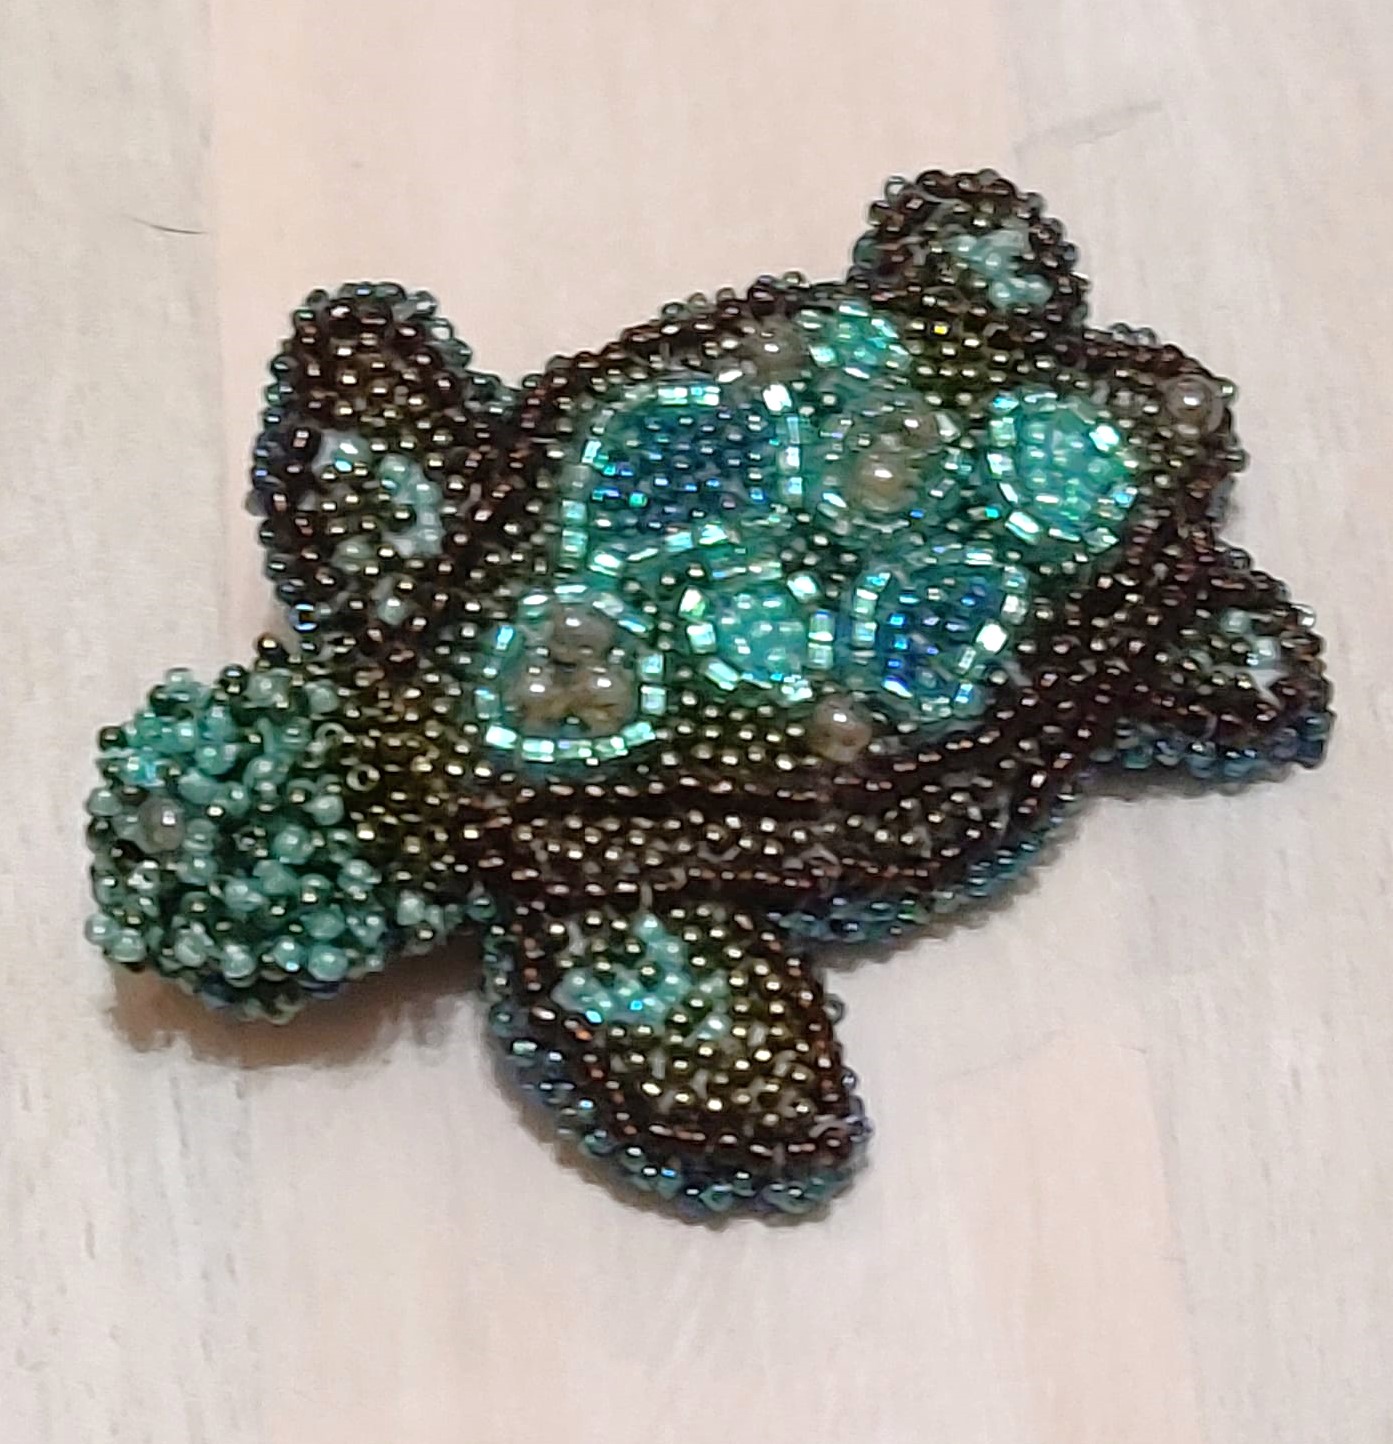 Turtle pin, handcrafted, bead embroidery, glass and crystals